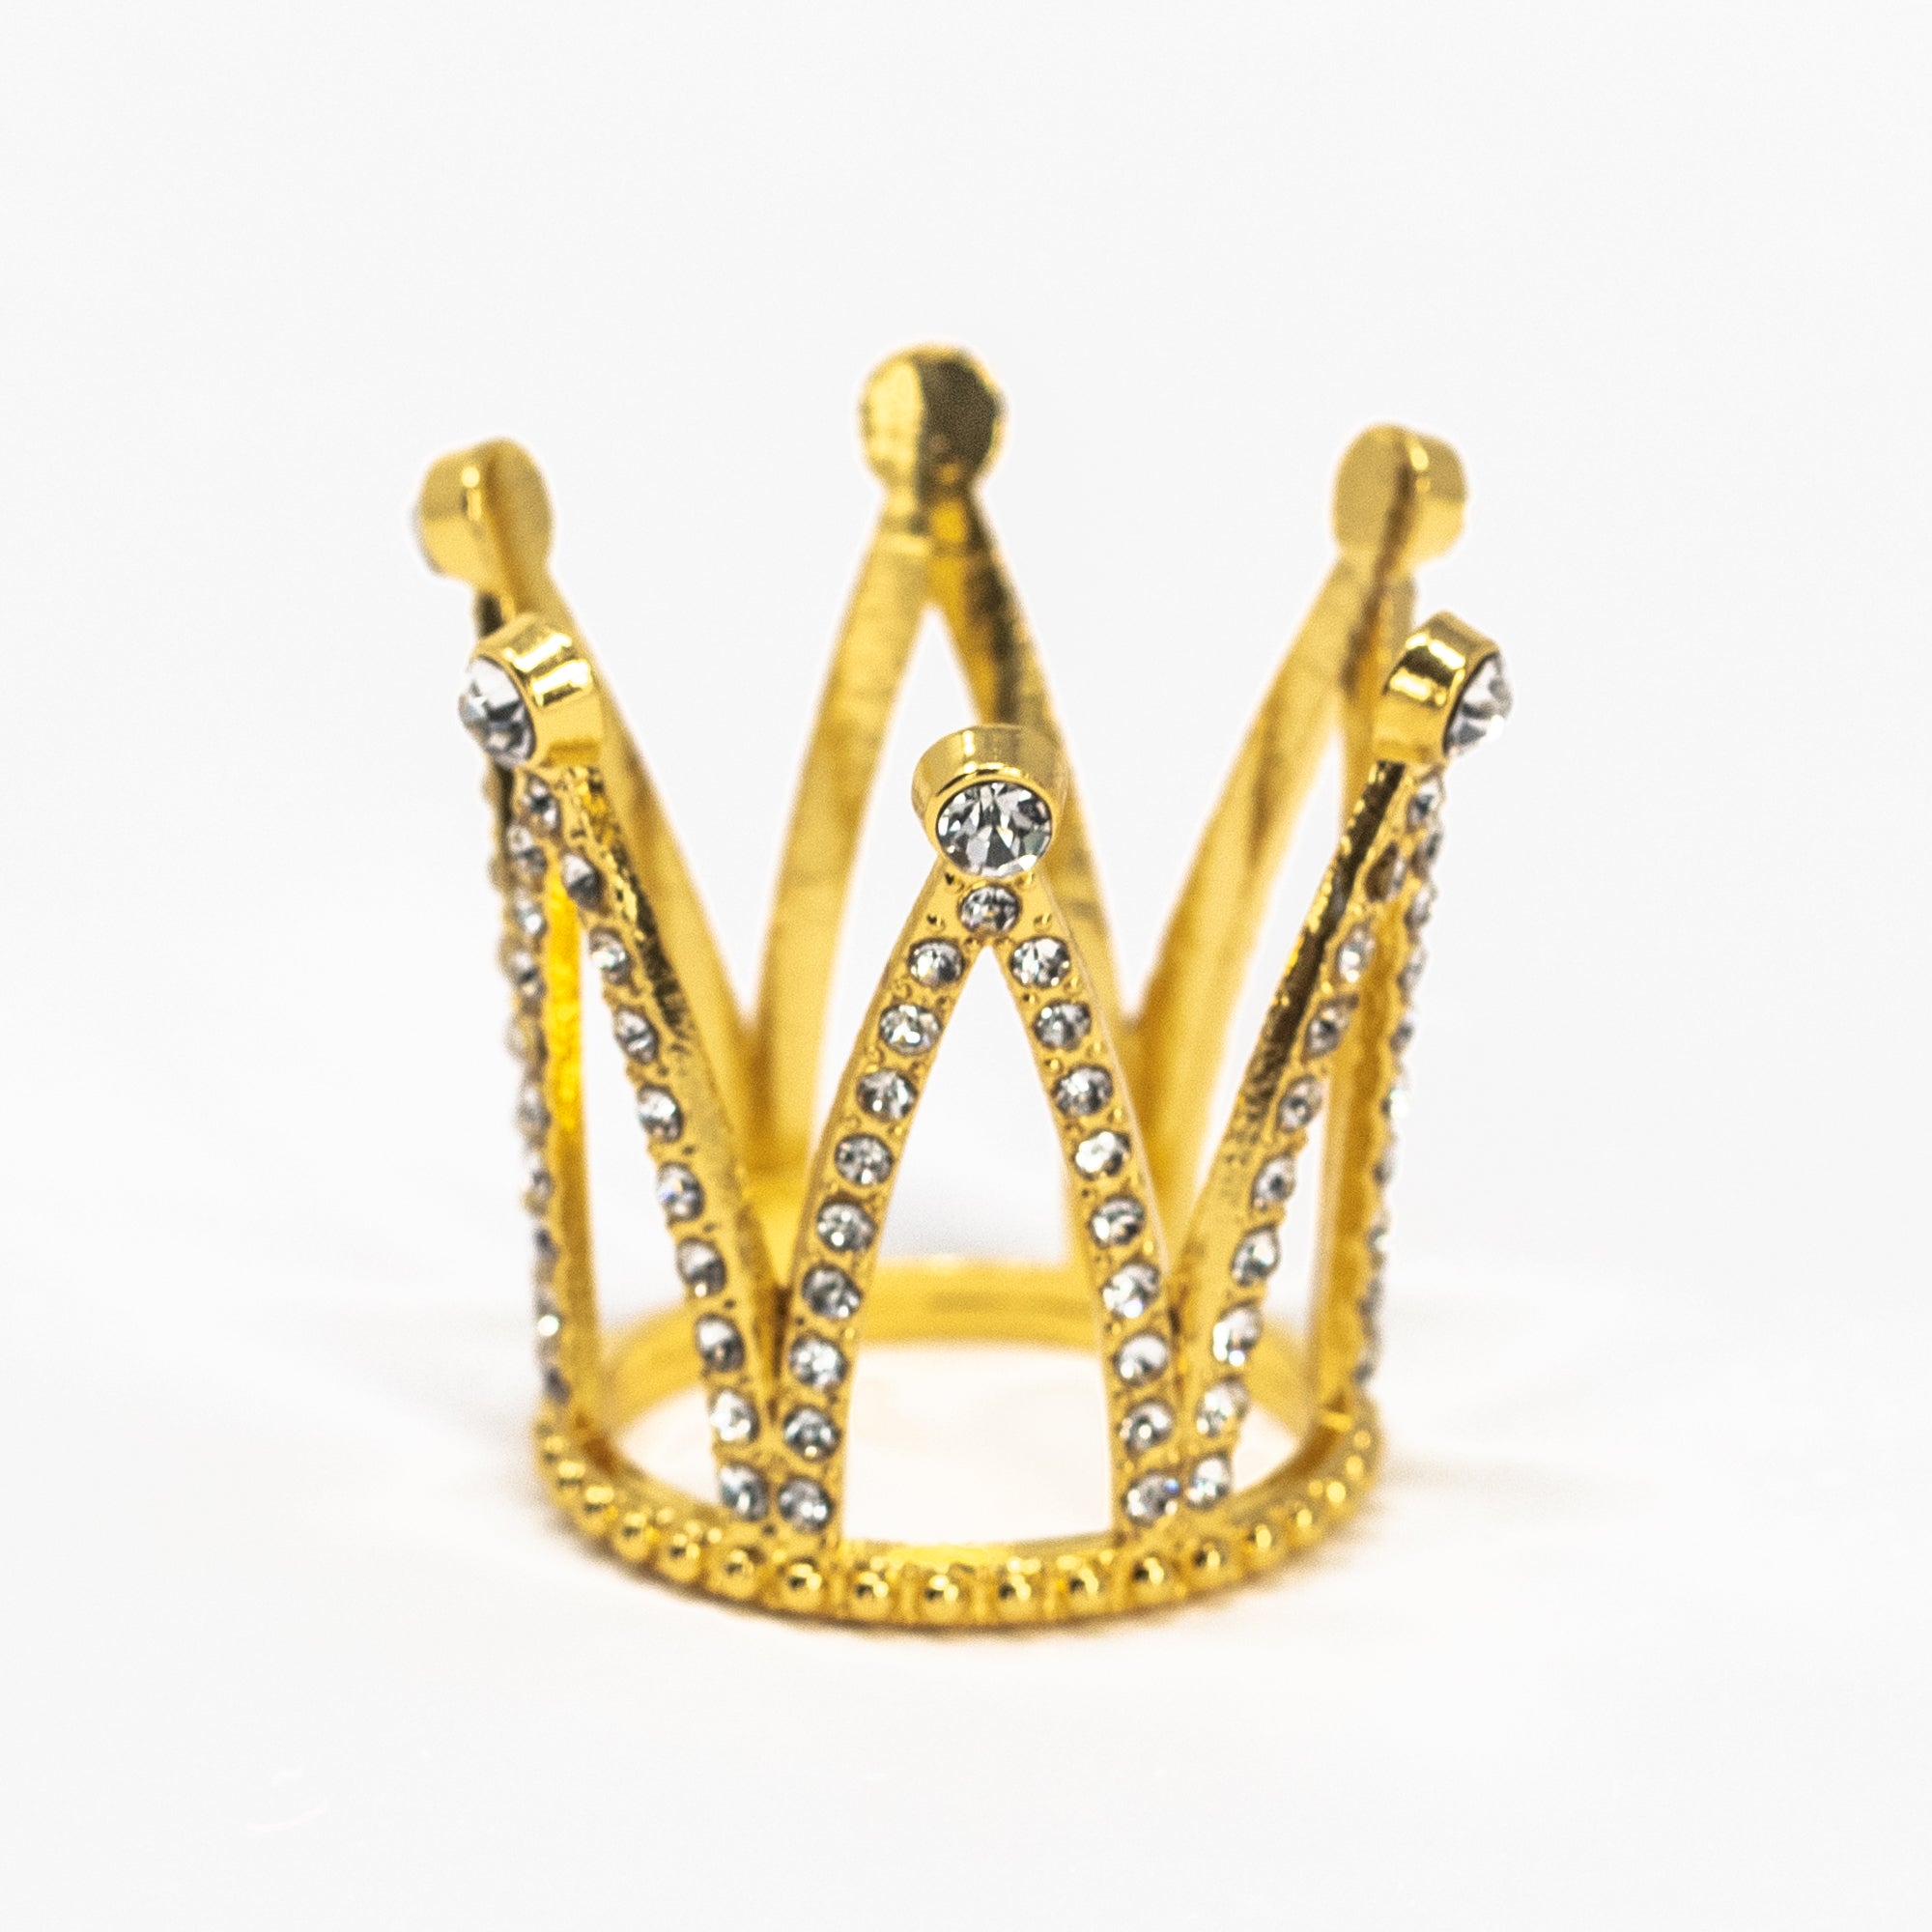 Mini Crowns Pack Gold - Totally Dazzled